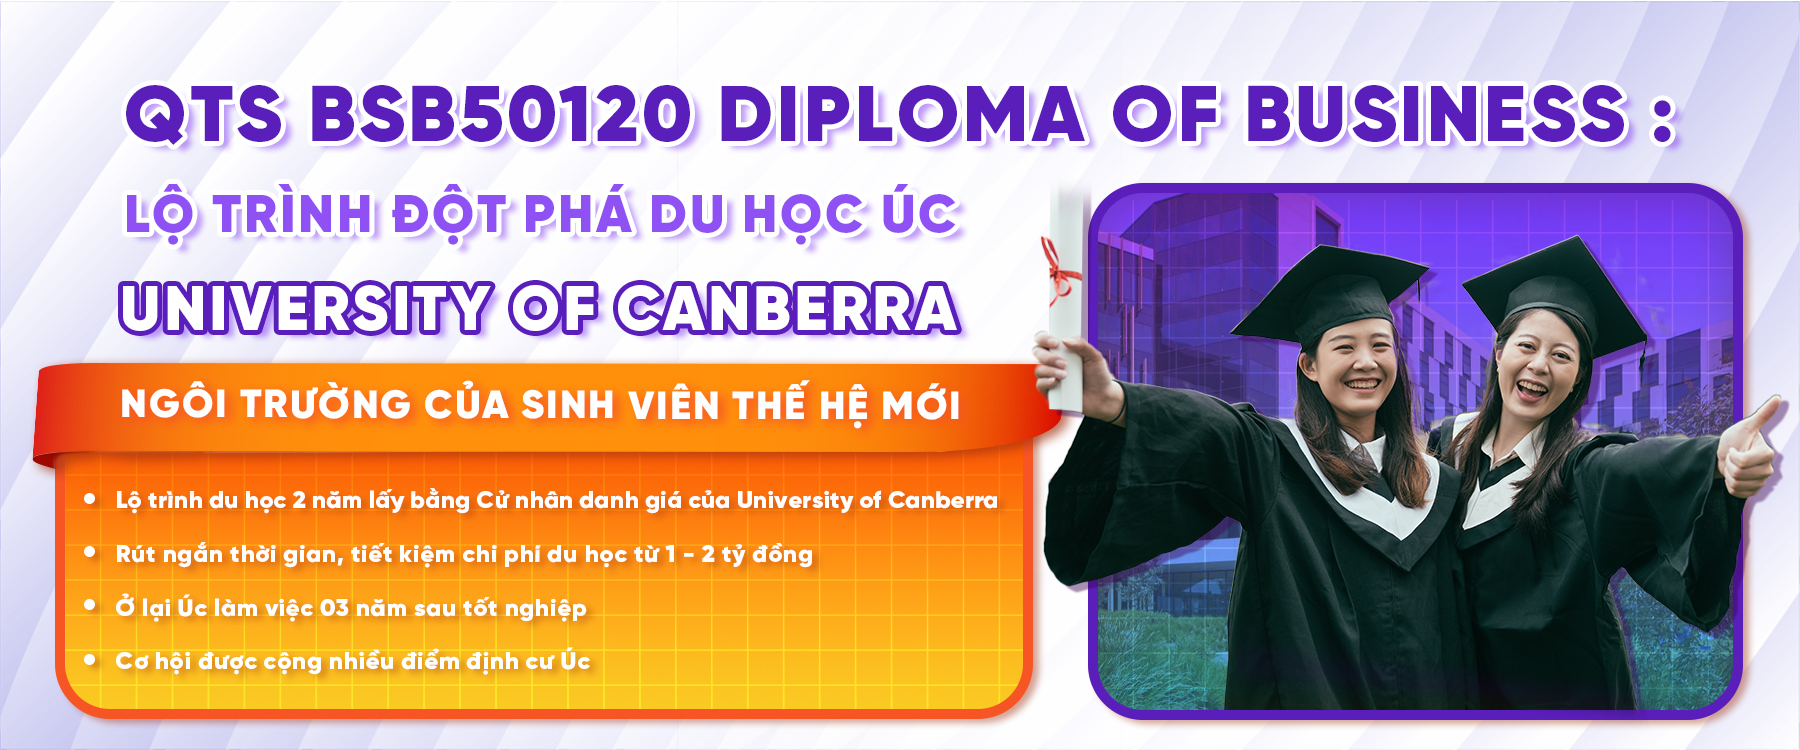 QTS BSB50120 Diploma of Busines University of Canberra